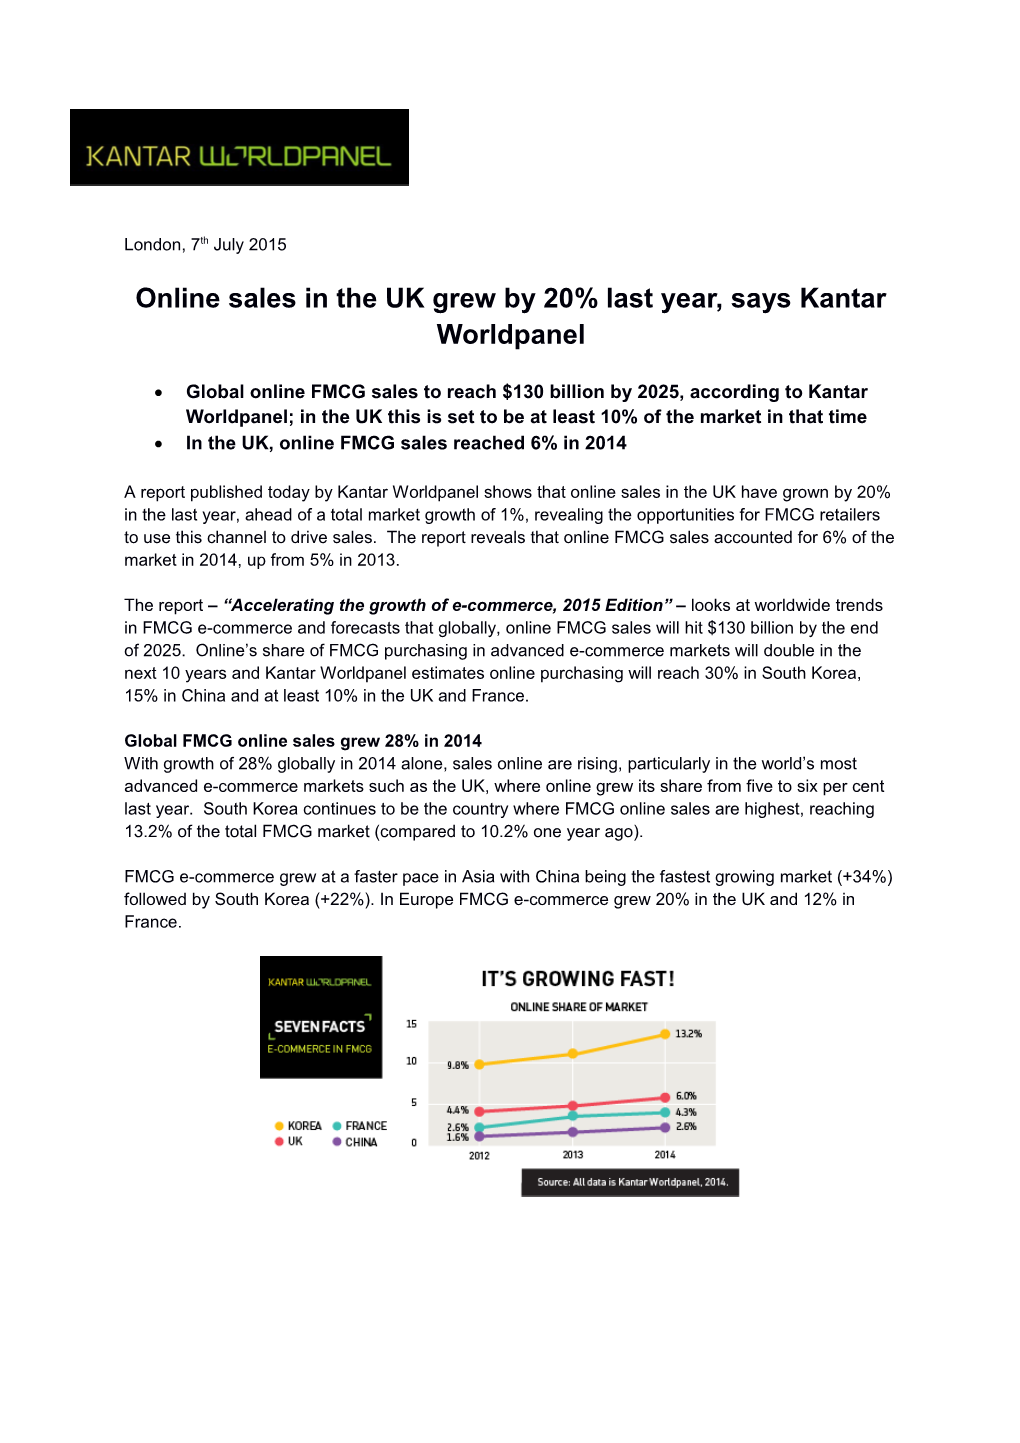 Online Salesin the UK Grew by 20% Last Year, Says Kantar Worldpanel